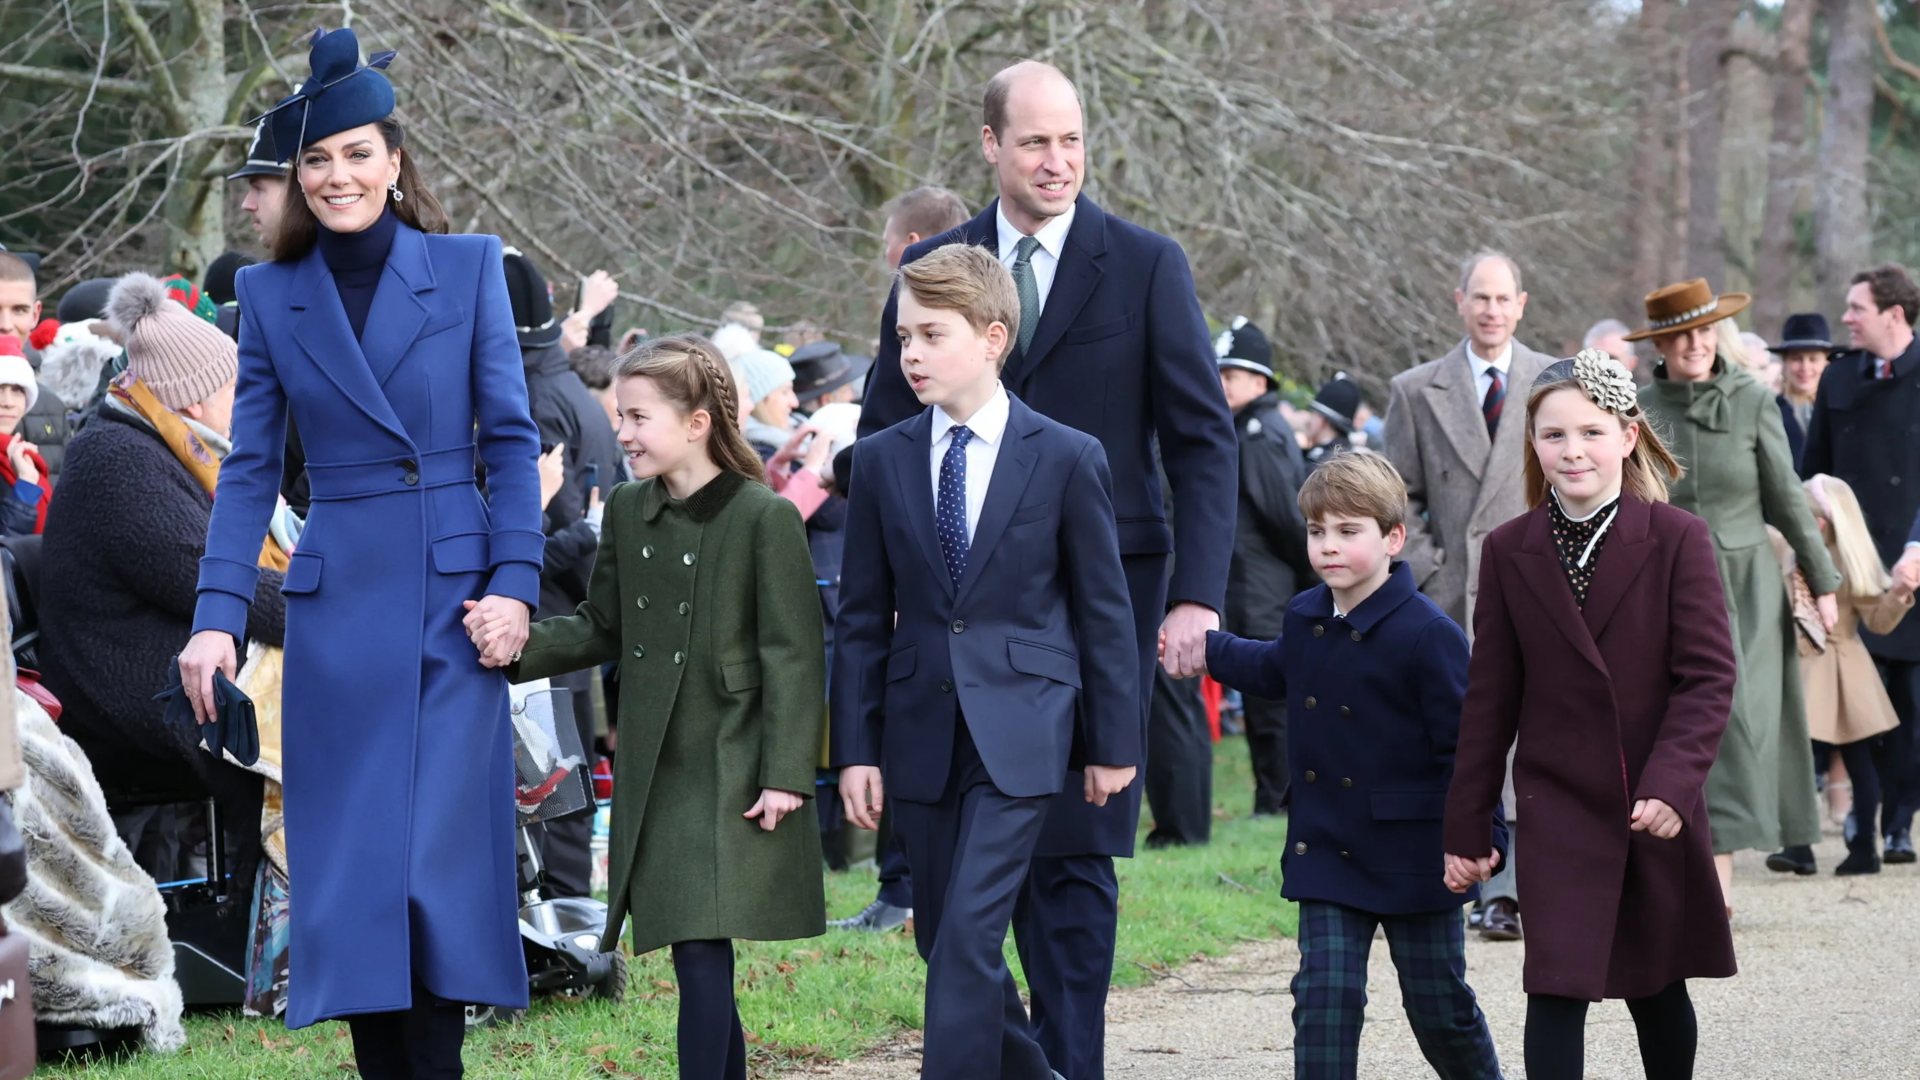 Princess of Wales was last seen when she walked to the church with Prince William and kids